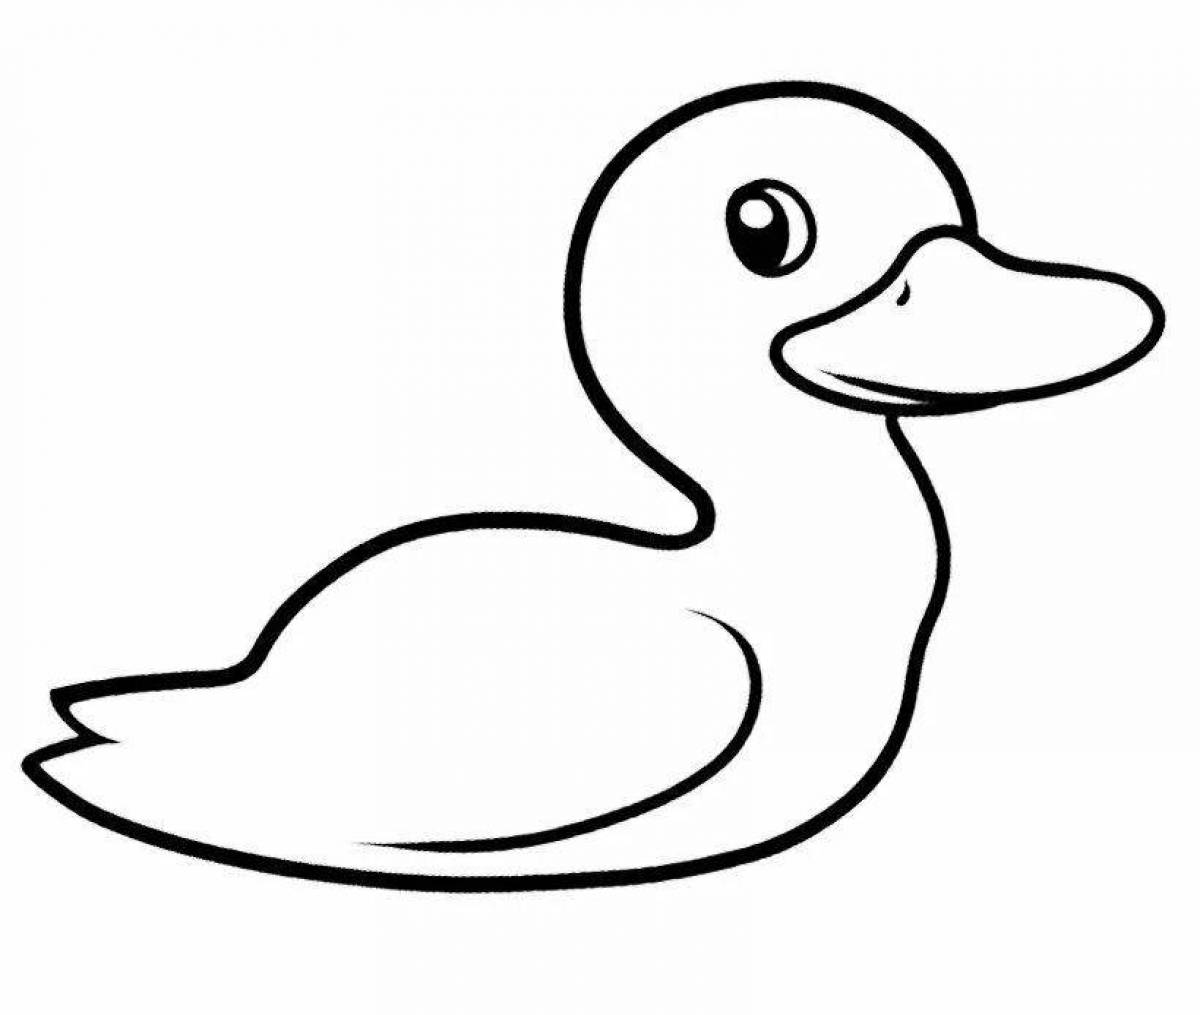 Duck picture for kids #4